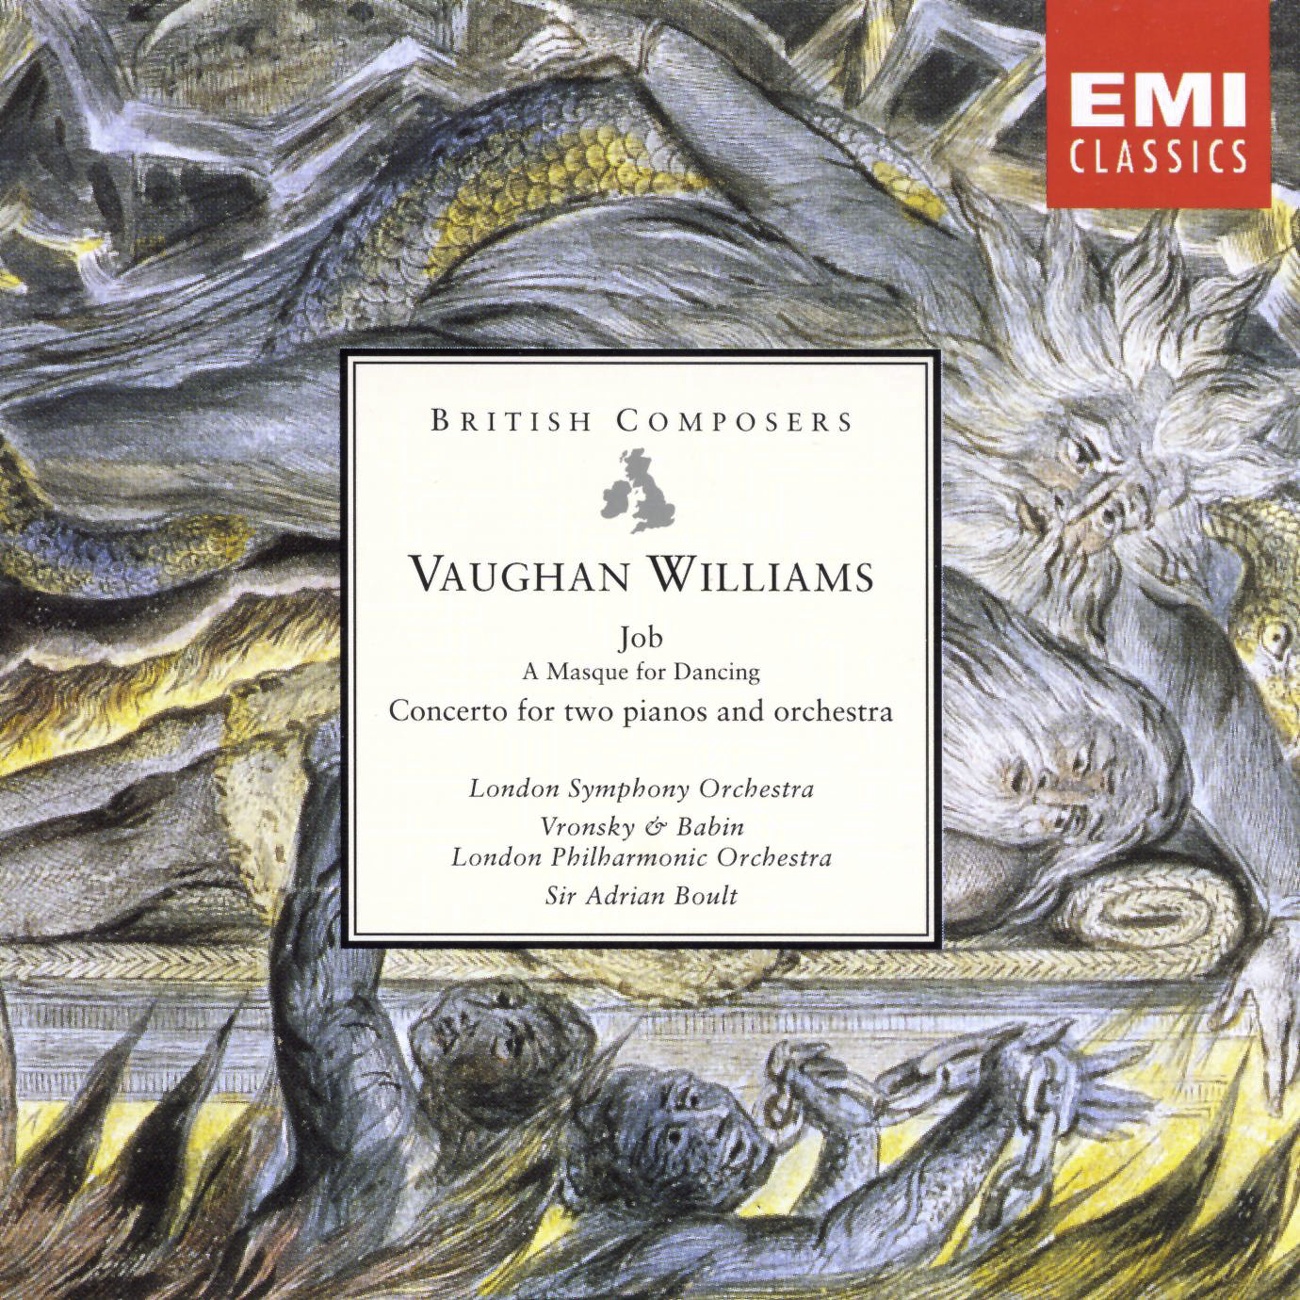 Vaughan Williams: Job, Concerto for two pianos & orchestra